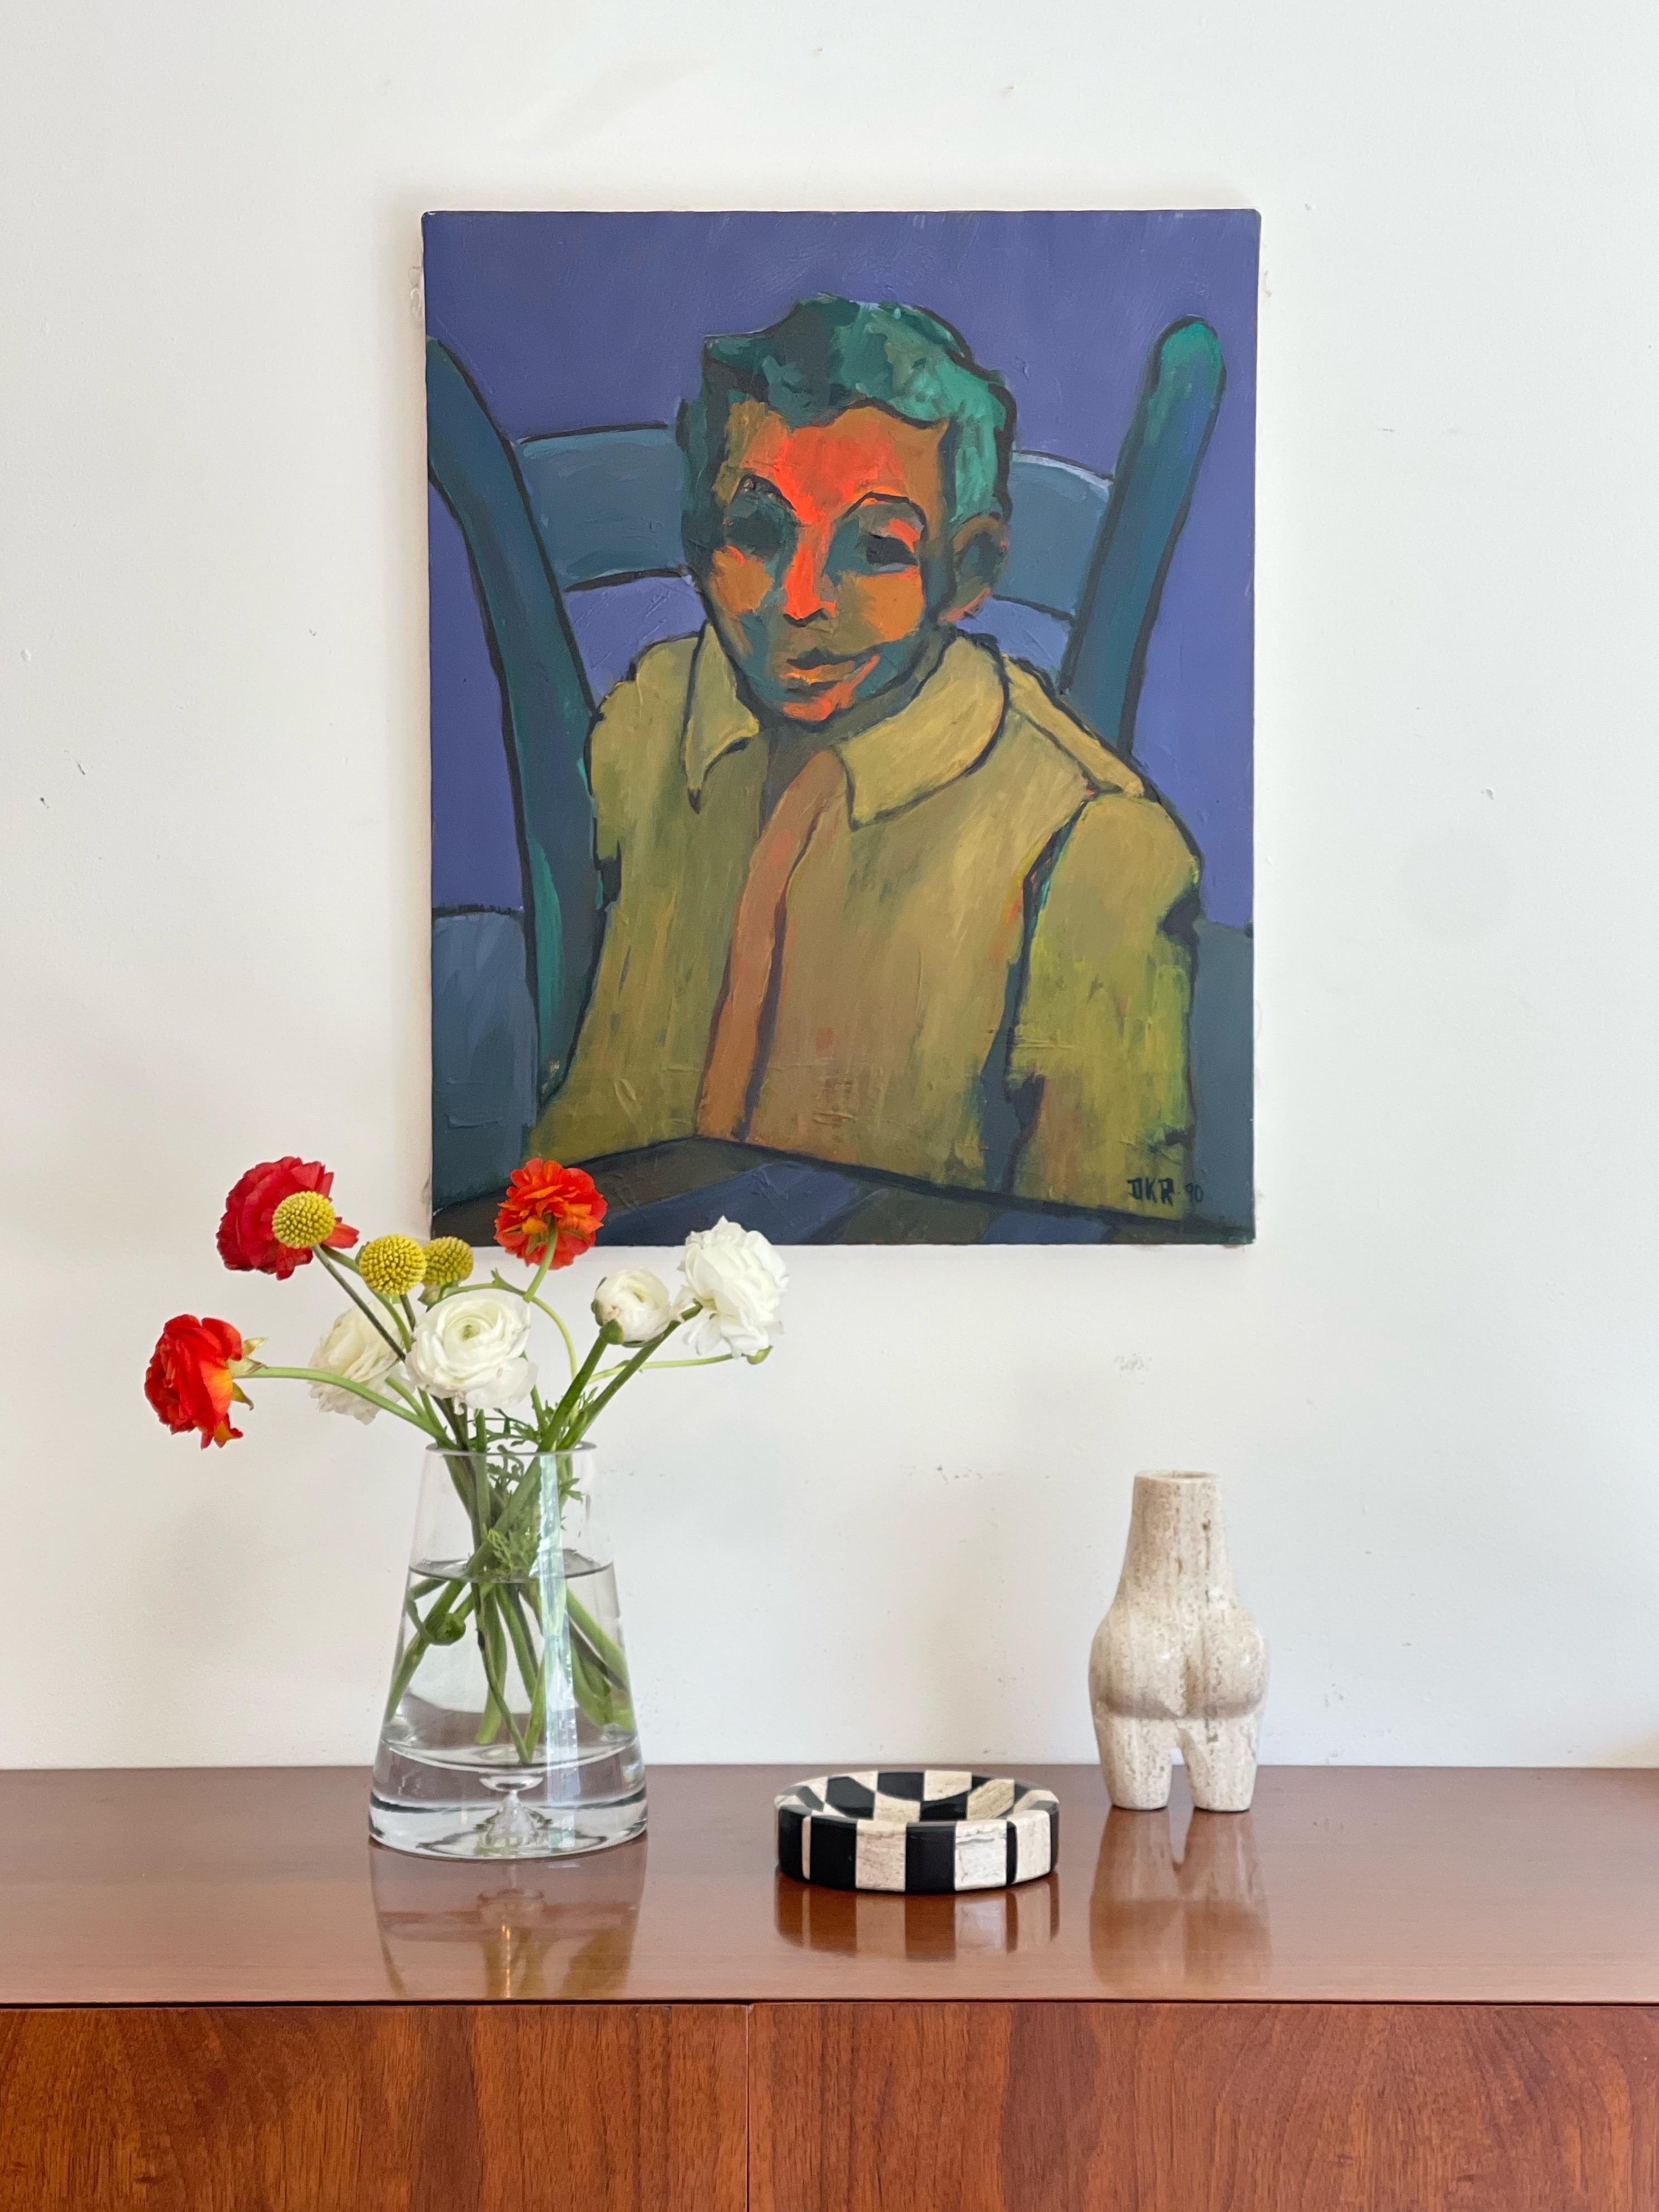 Original oil painting self portrait of the late Donald K Ryan.
Donald K Ryan’s work spans mostly from the 80s to the early 2000s. Throughout his career he was juried into more than 40 local, regional, national, and international shows. He also